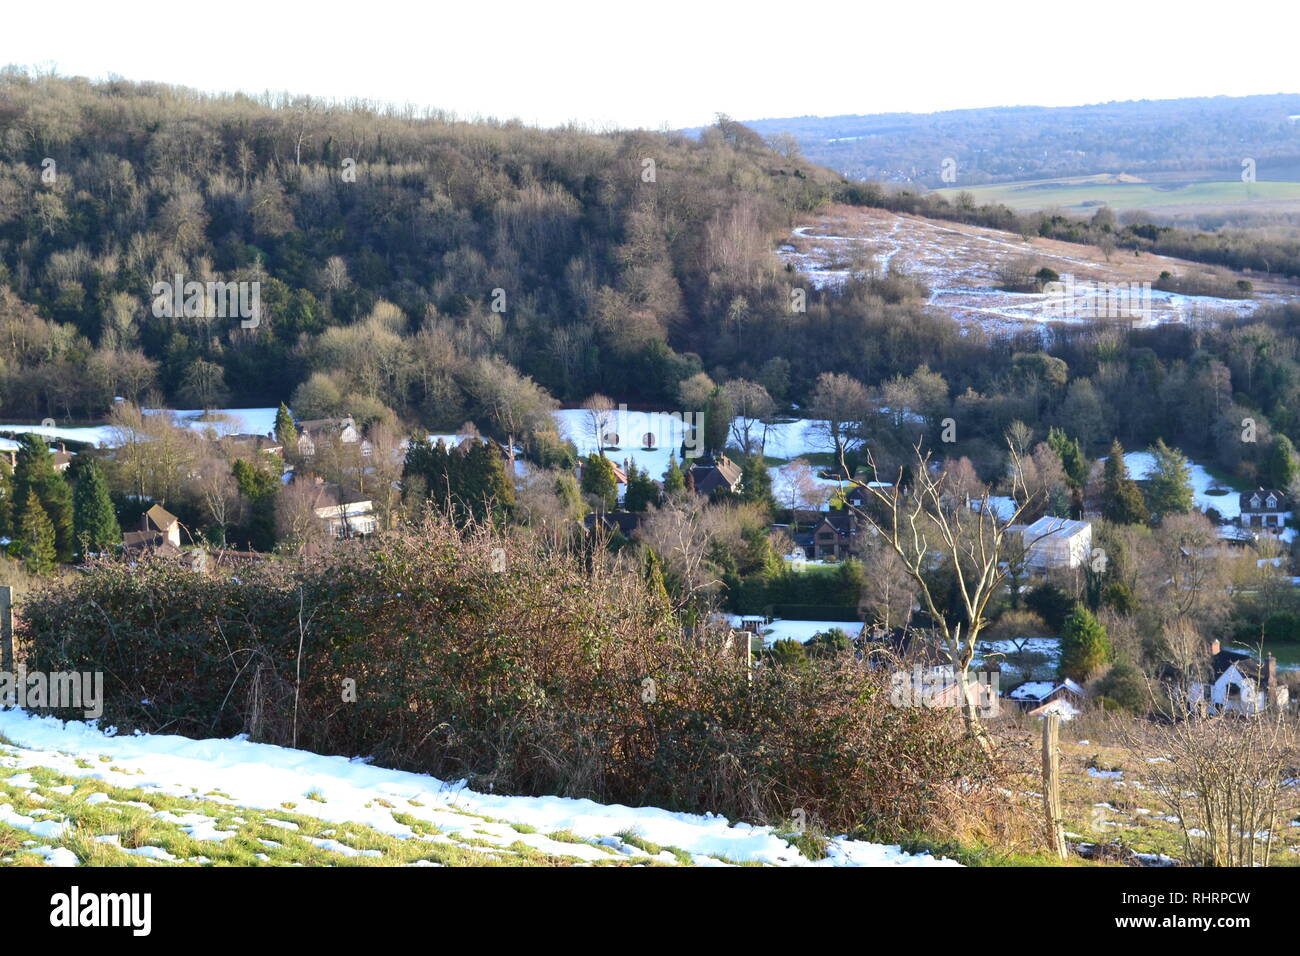 Looking down on an offshoot of Otford village from high on Fackenden Down in winter, February 2019 Stock Photo